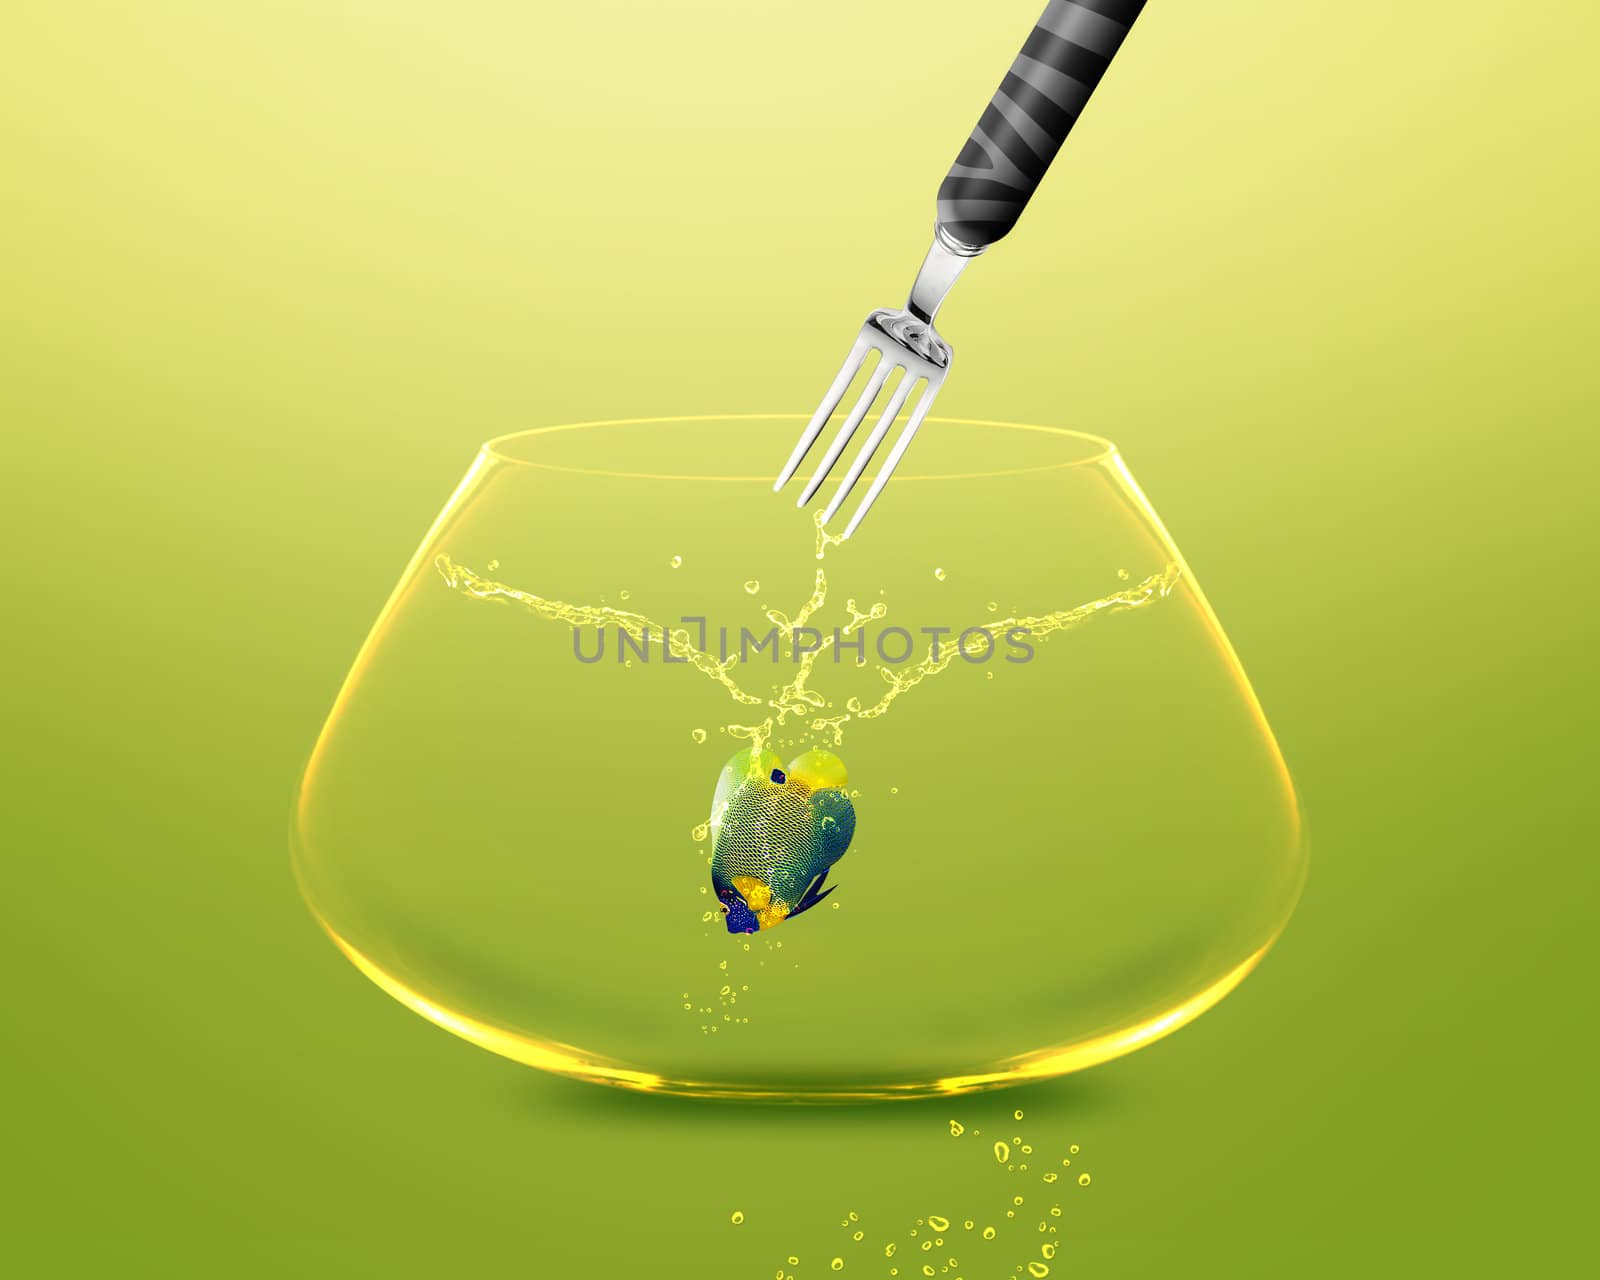 Fork catch angelfish in fishbowl by designsstock